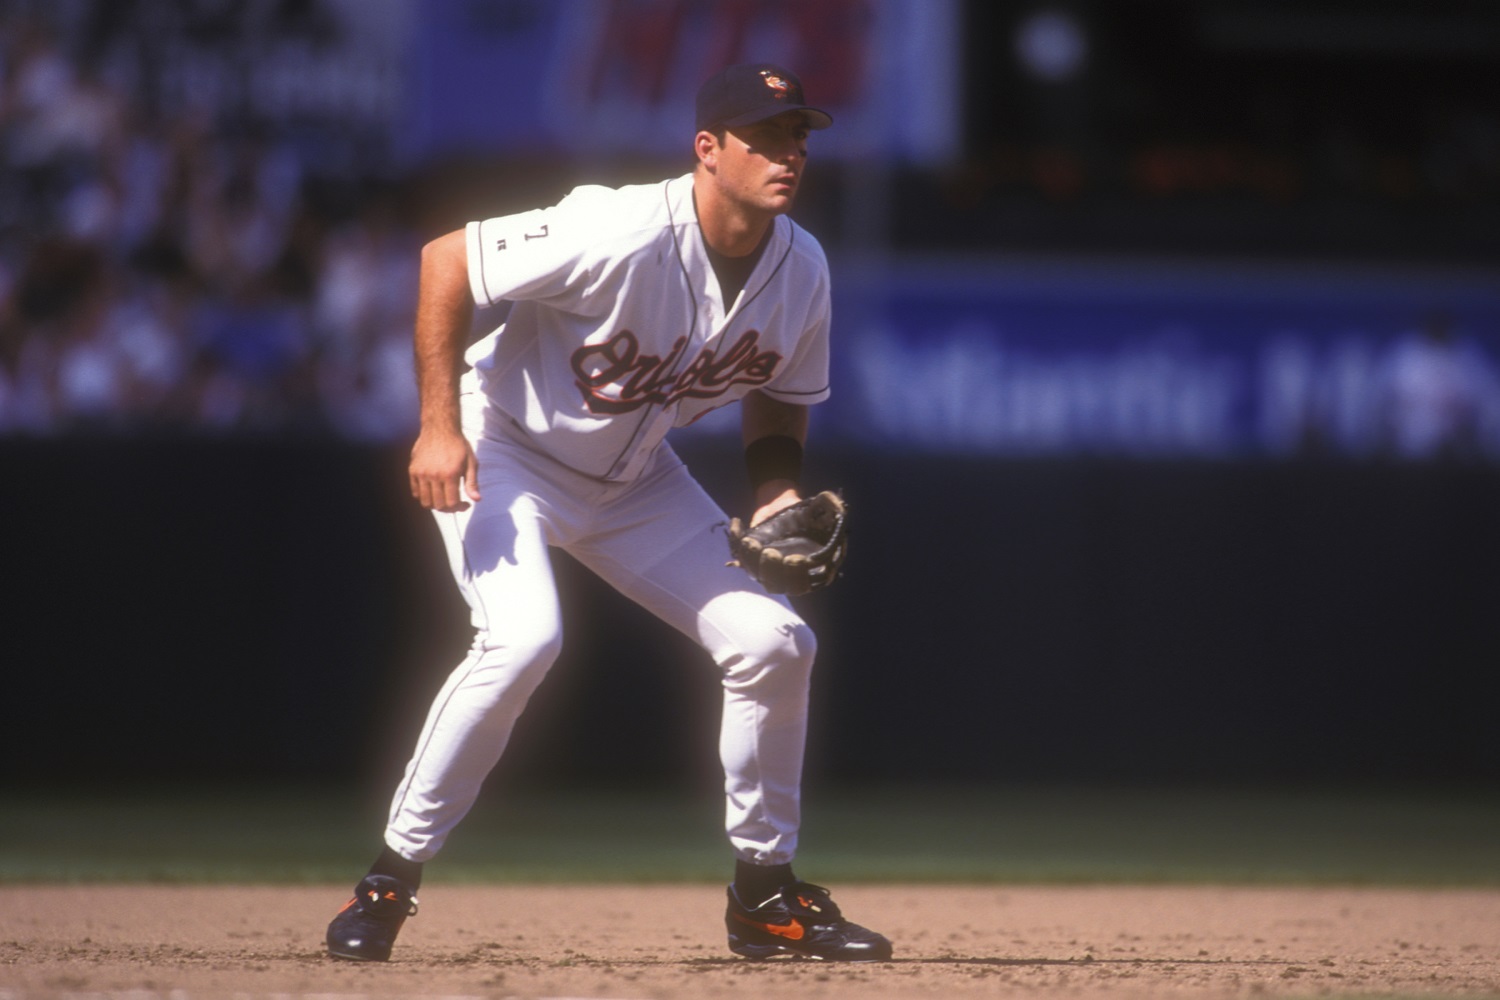 What Ever Happened to Ryan Minor, the Man Who Replaced Cal Ripken Jr., Ending the Streak?